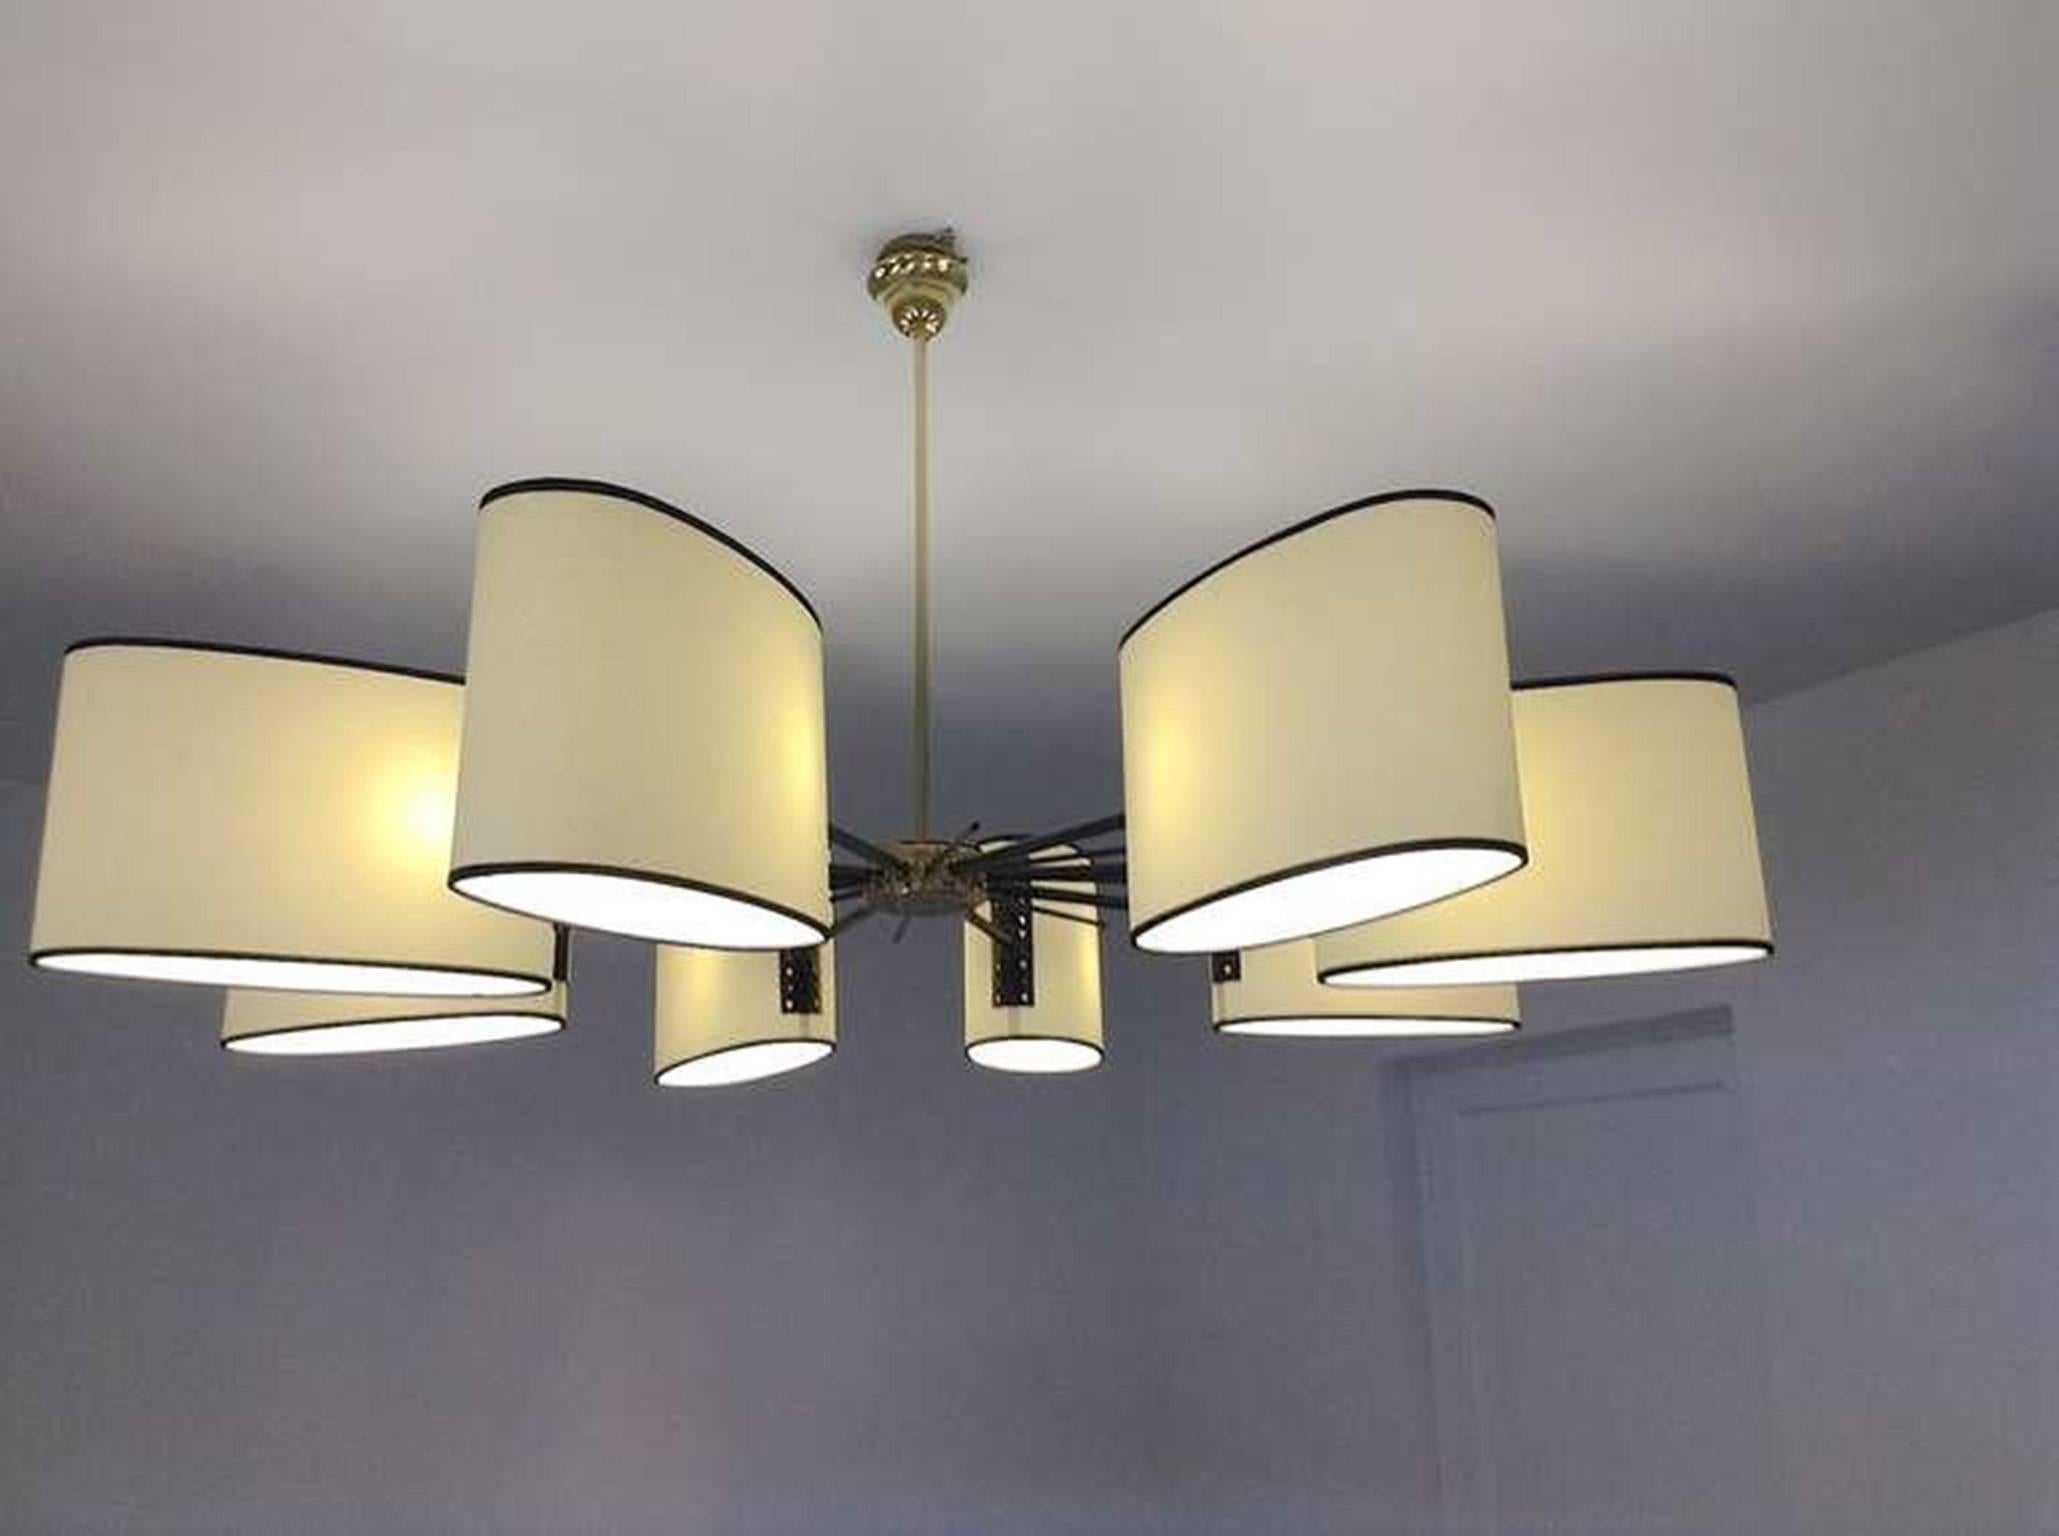 Contemporary Celling Light by Henri Feernandez for Antiquesmc